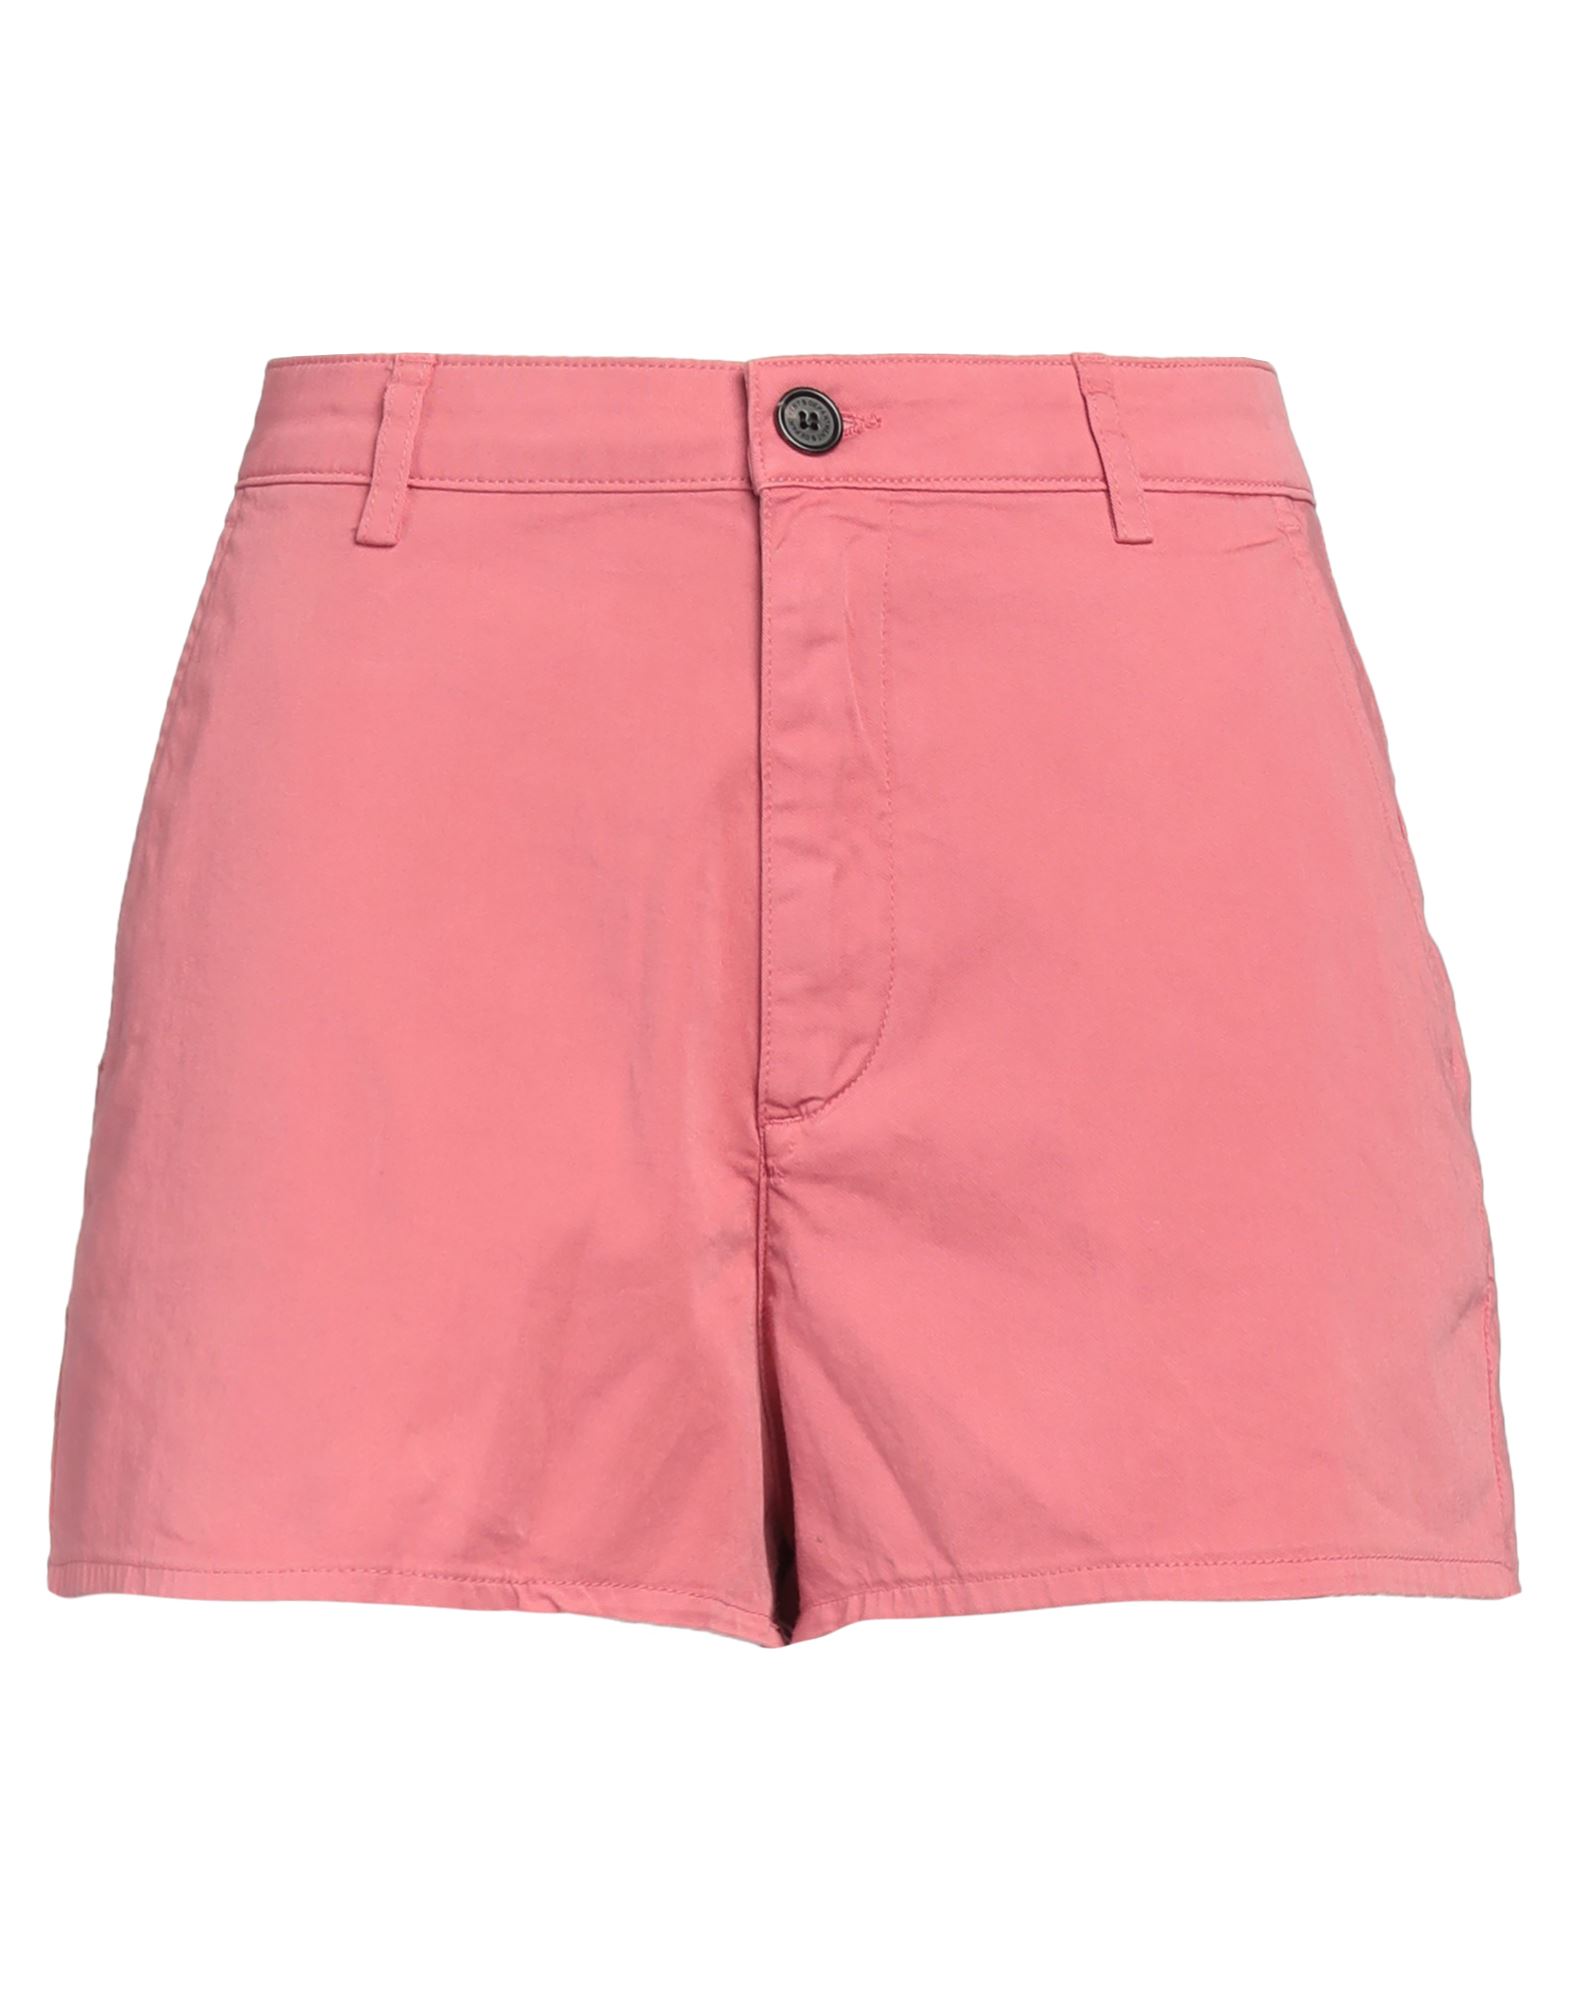 Department 5 Woman Shorts & Bermuda Shorts Coral Size 30 Cotton, Elastane In Red